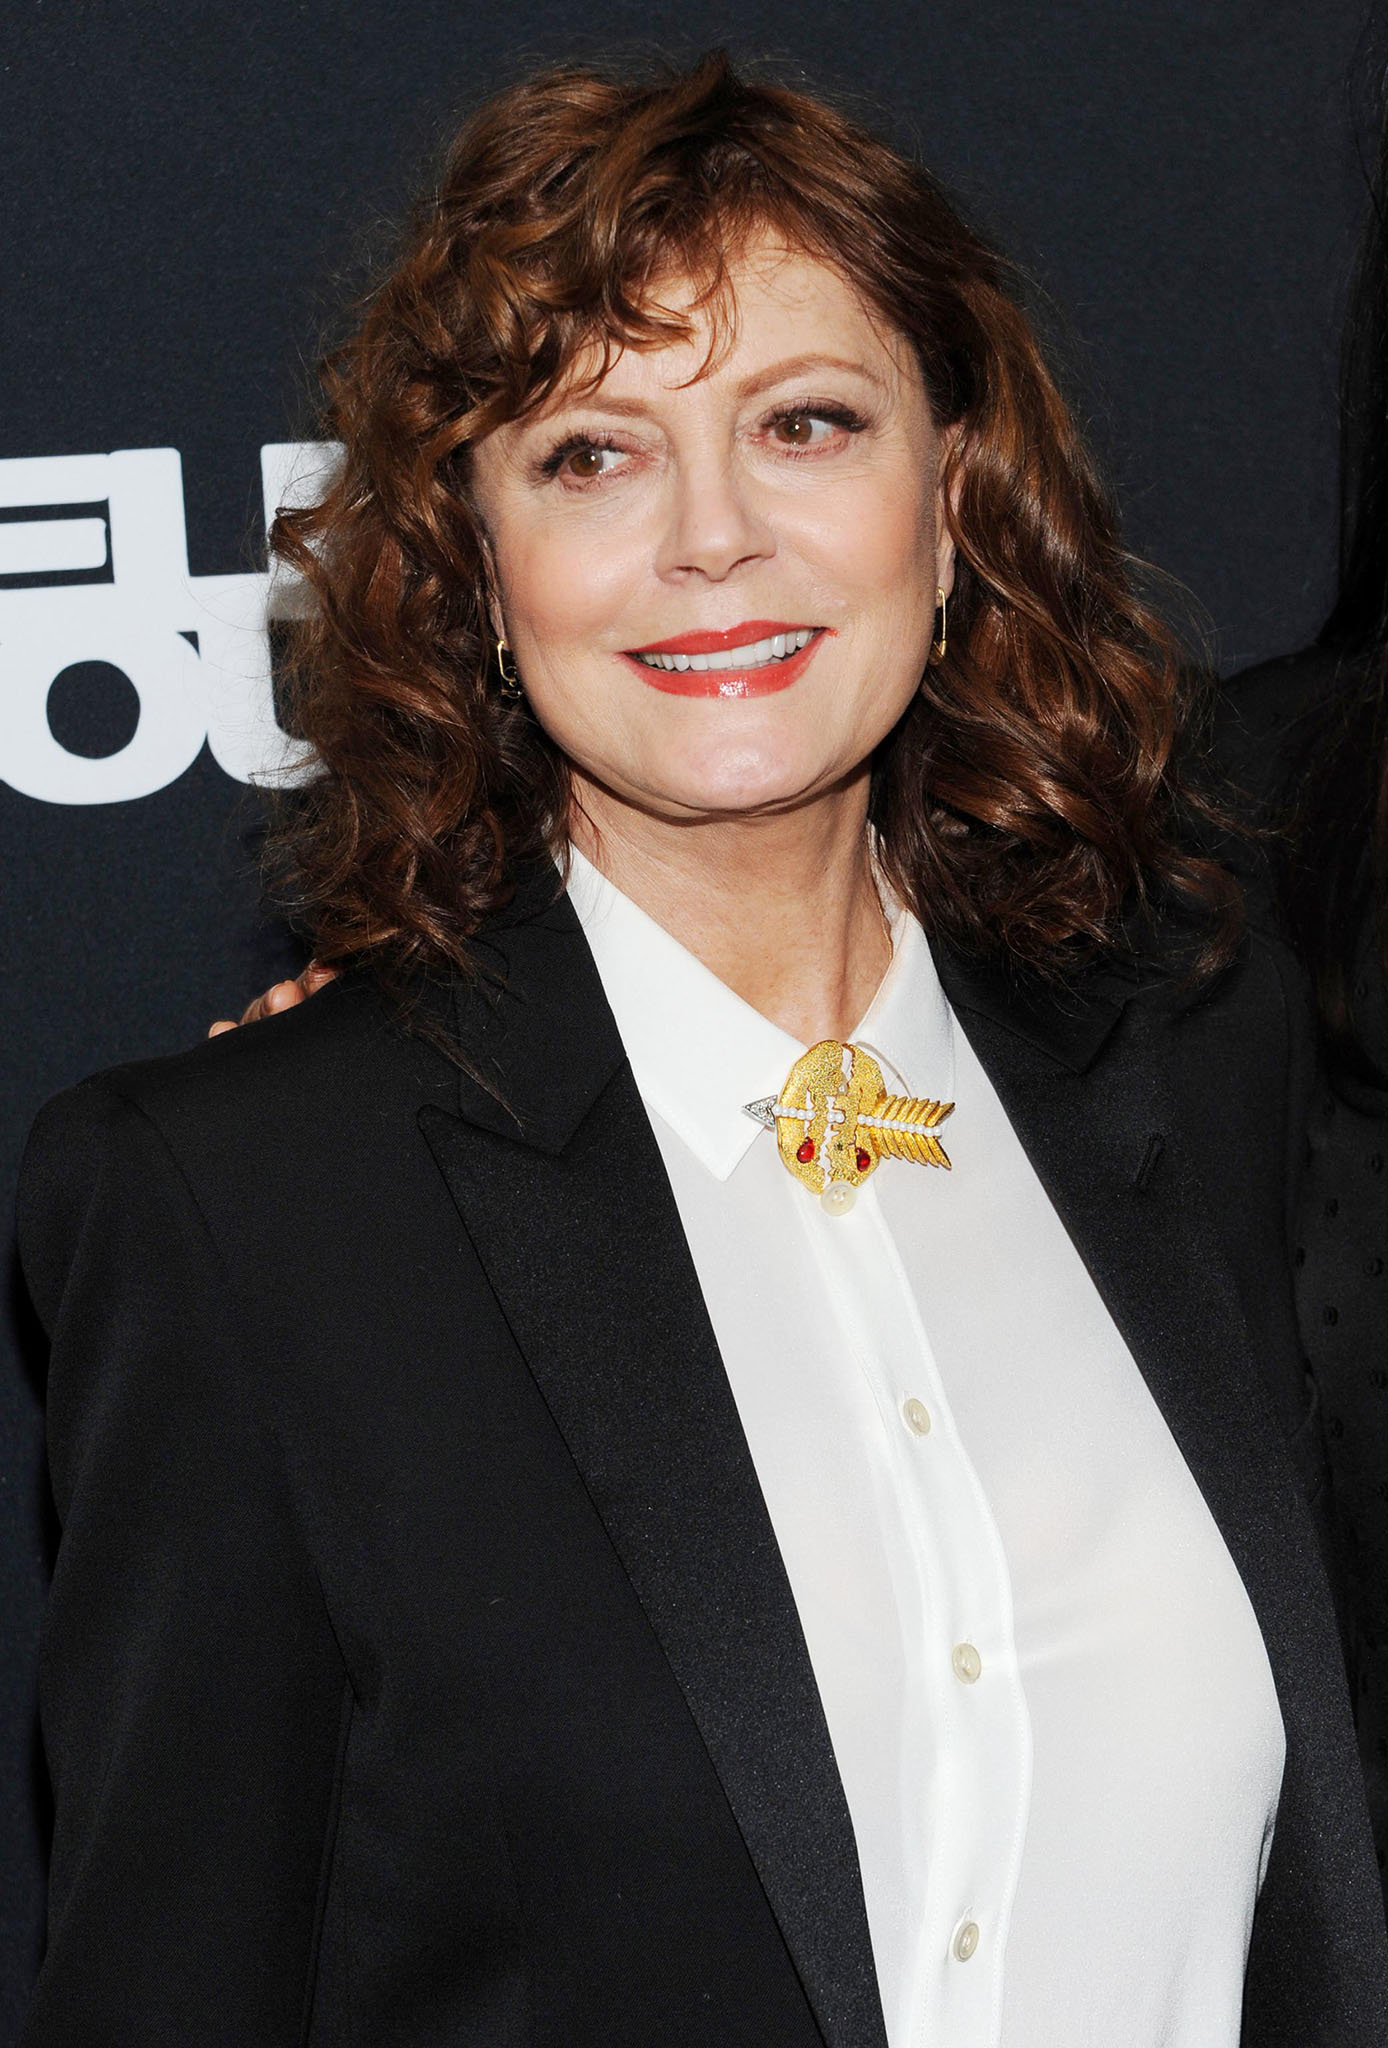 Susan Sarandon, pictured in January 2020 at the special screening of Thelma & Louise, portrayed Louise in the 1991 road trip movie